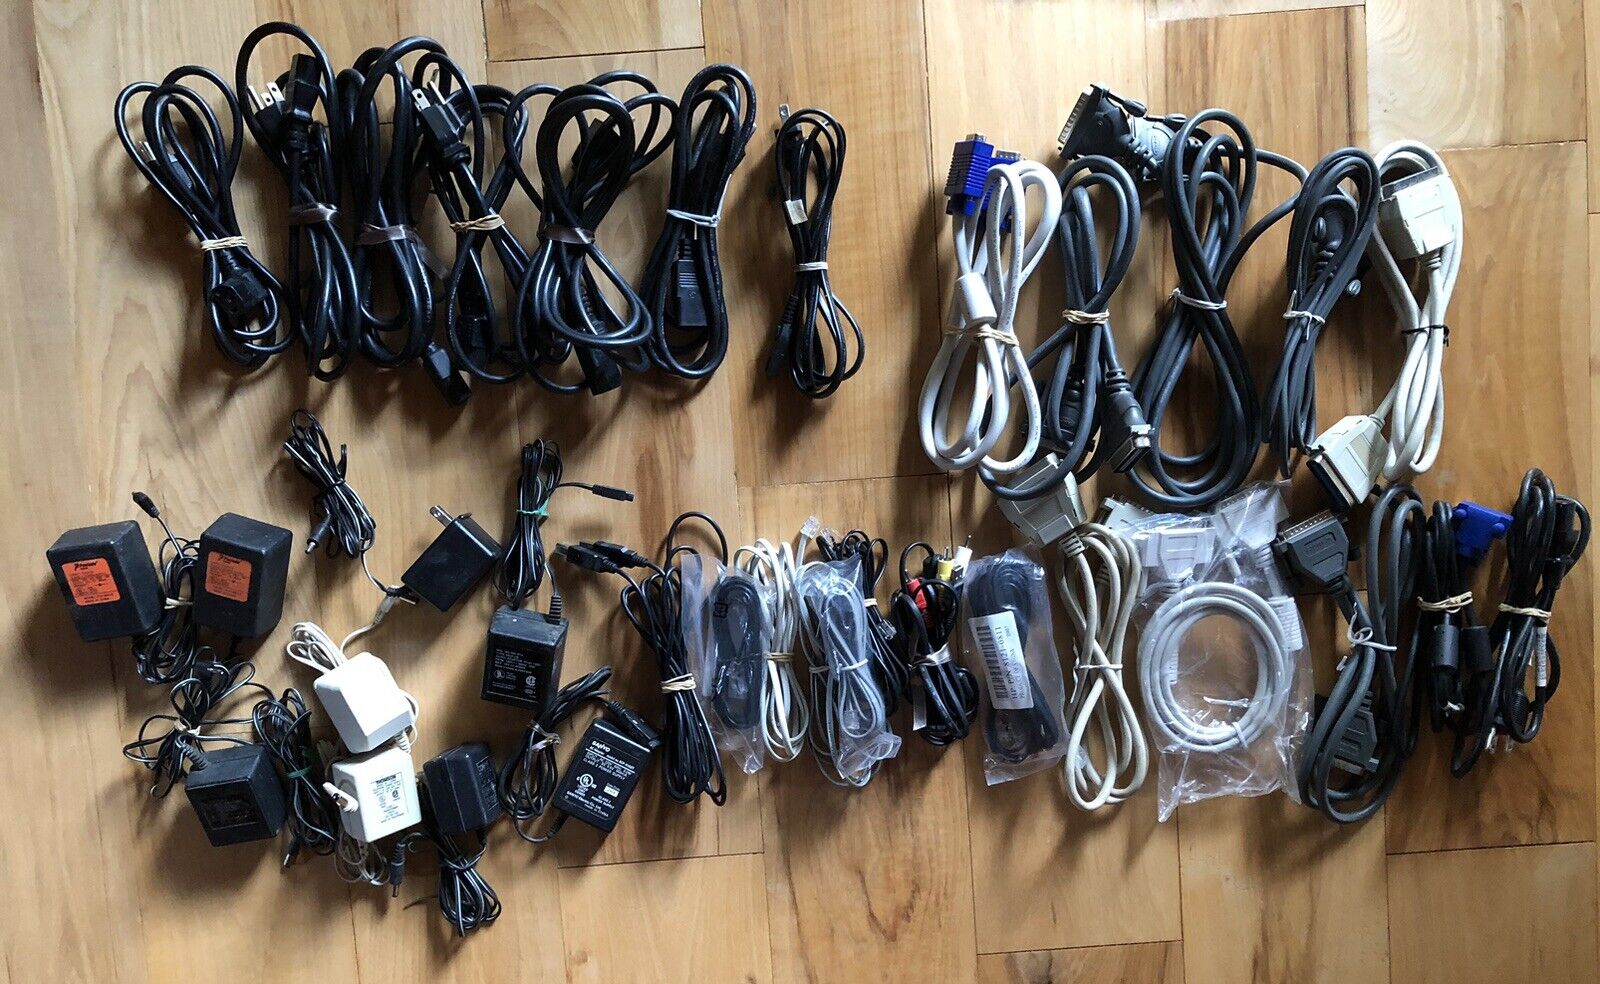 VTG Lot Of 34 Computer Power Supply Cords/3 Prong Cords/Connector/Printer Cables